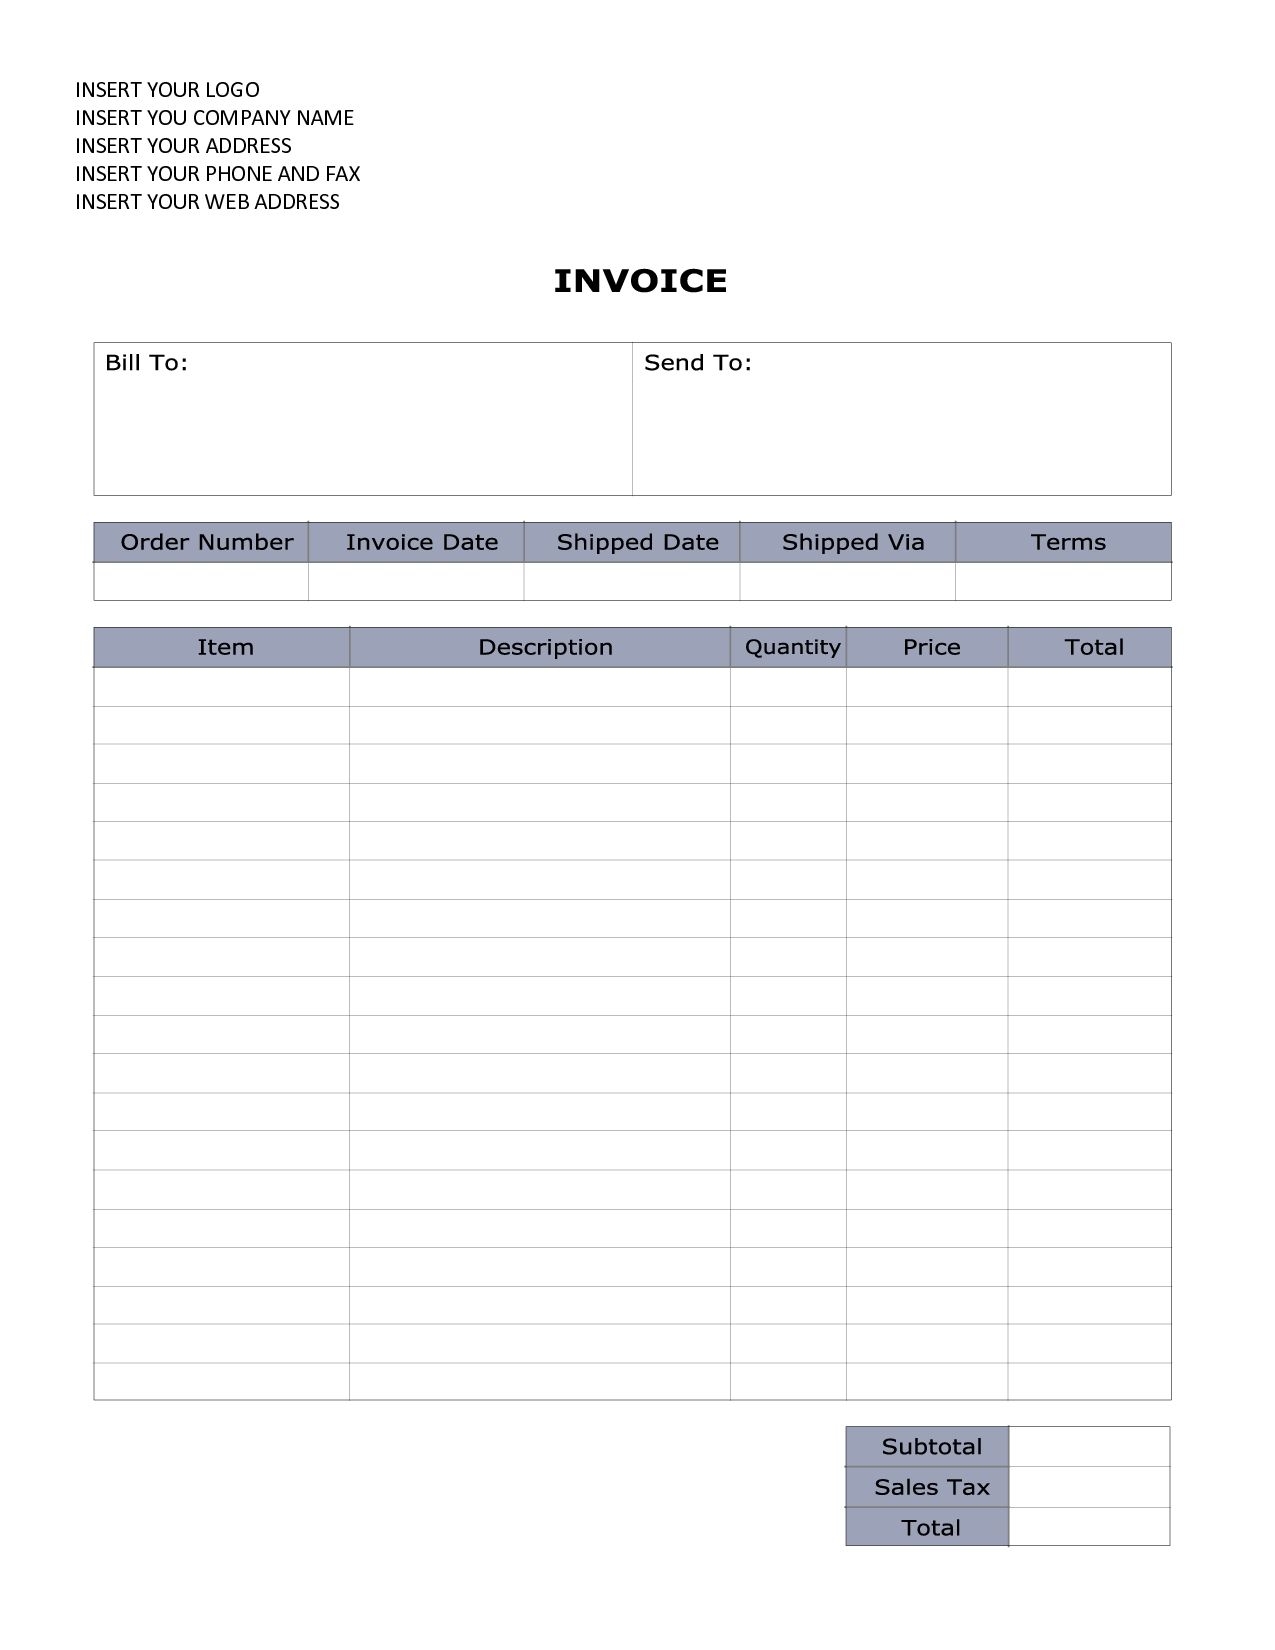 word document invoice template sales invoice sample word sales invoice template microsoft word